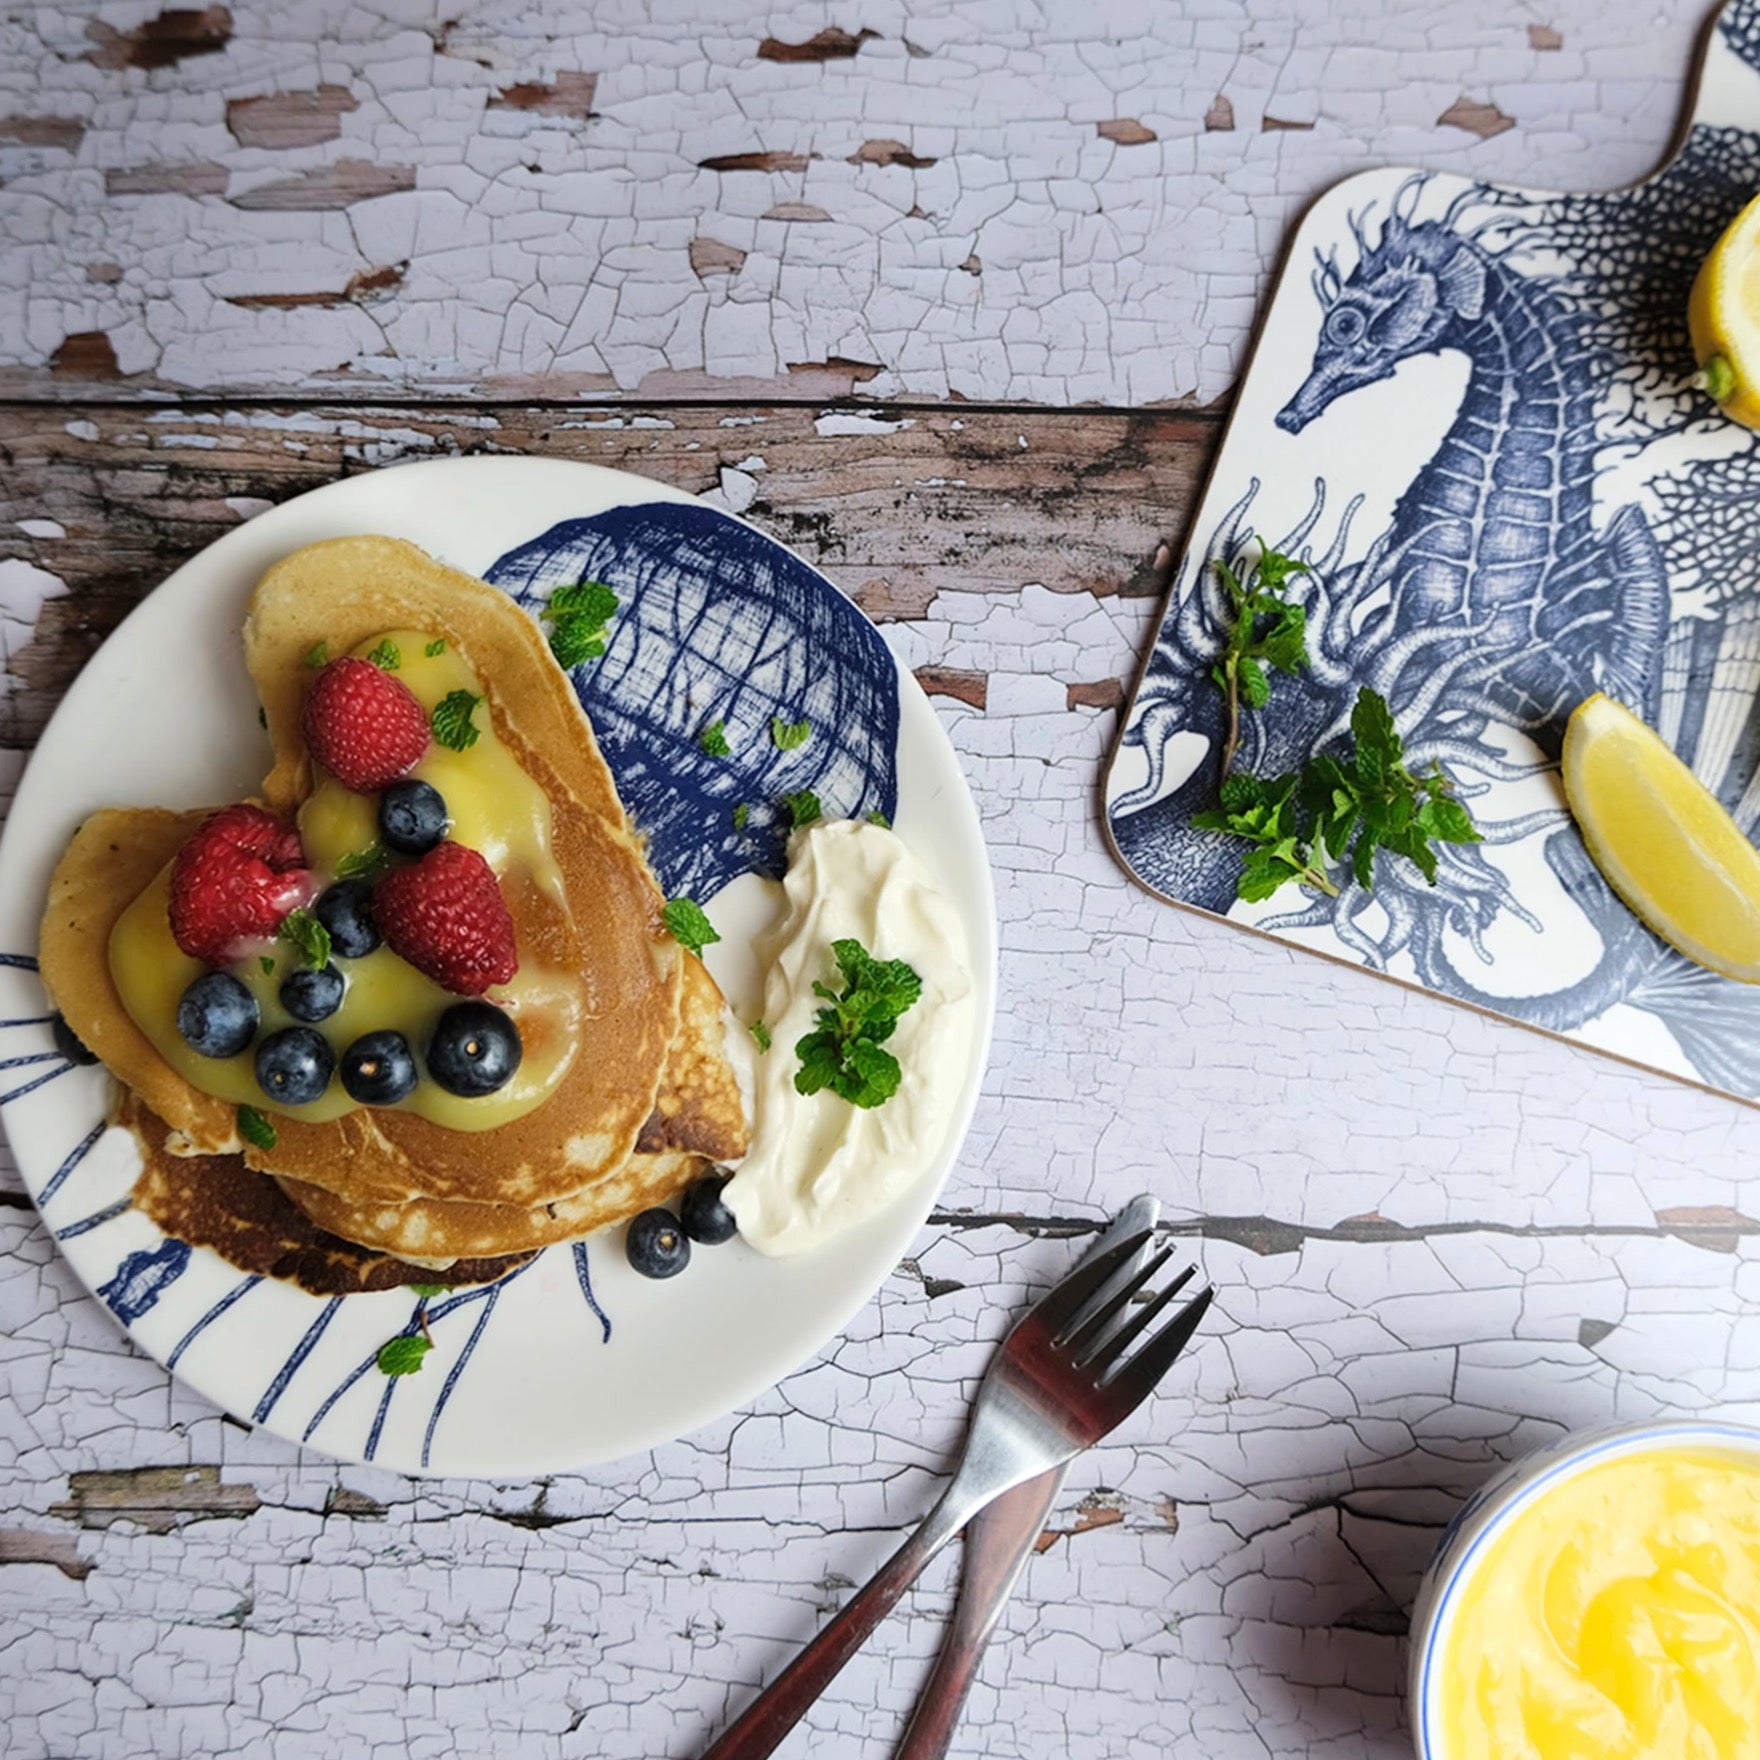 Bone China Jellyfish side plate with homemade pancakes covered with fruit. Next to the side plate is our seahorse chopping board with lemons